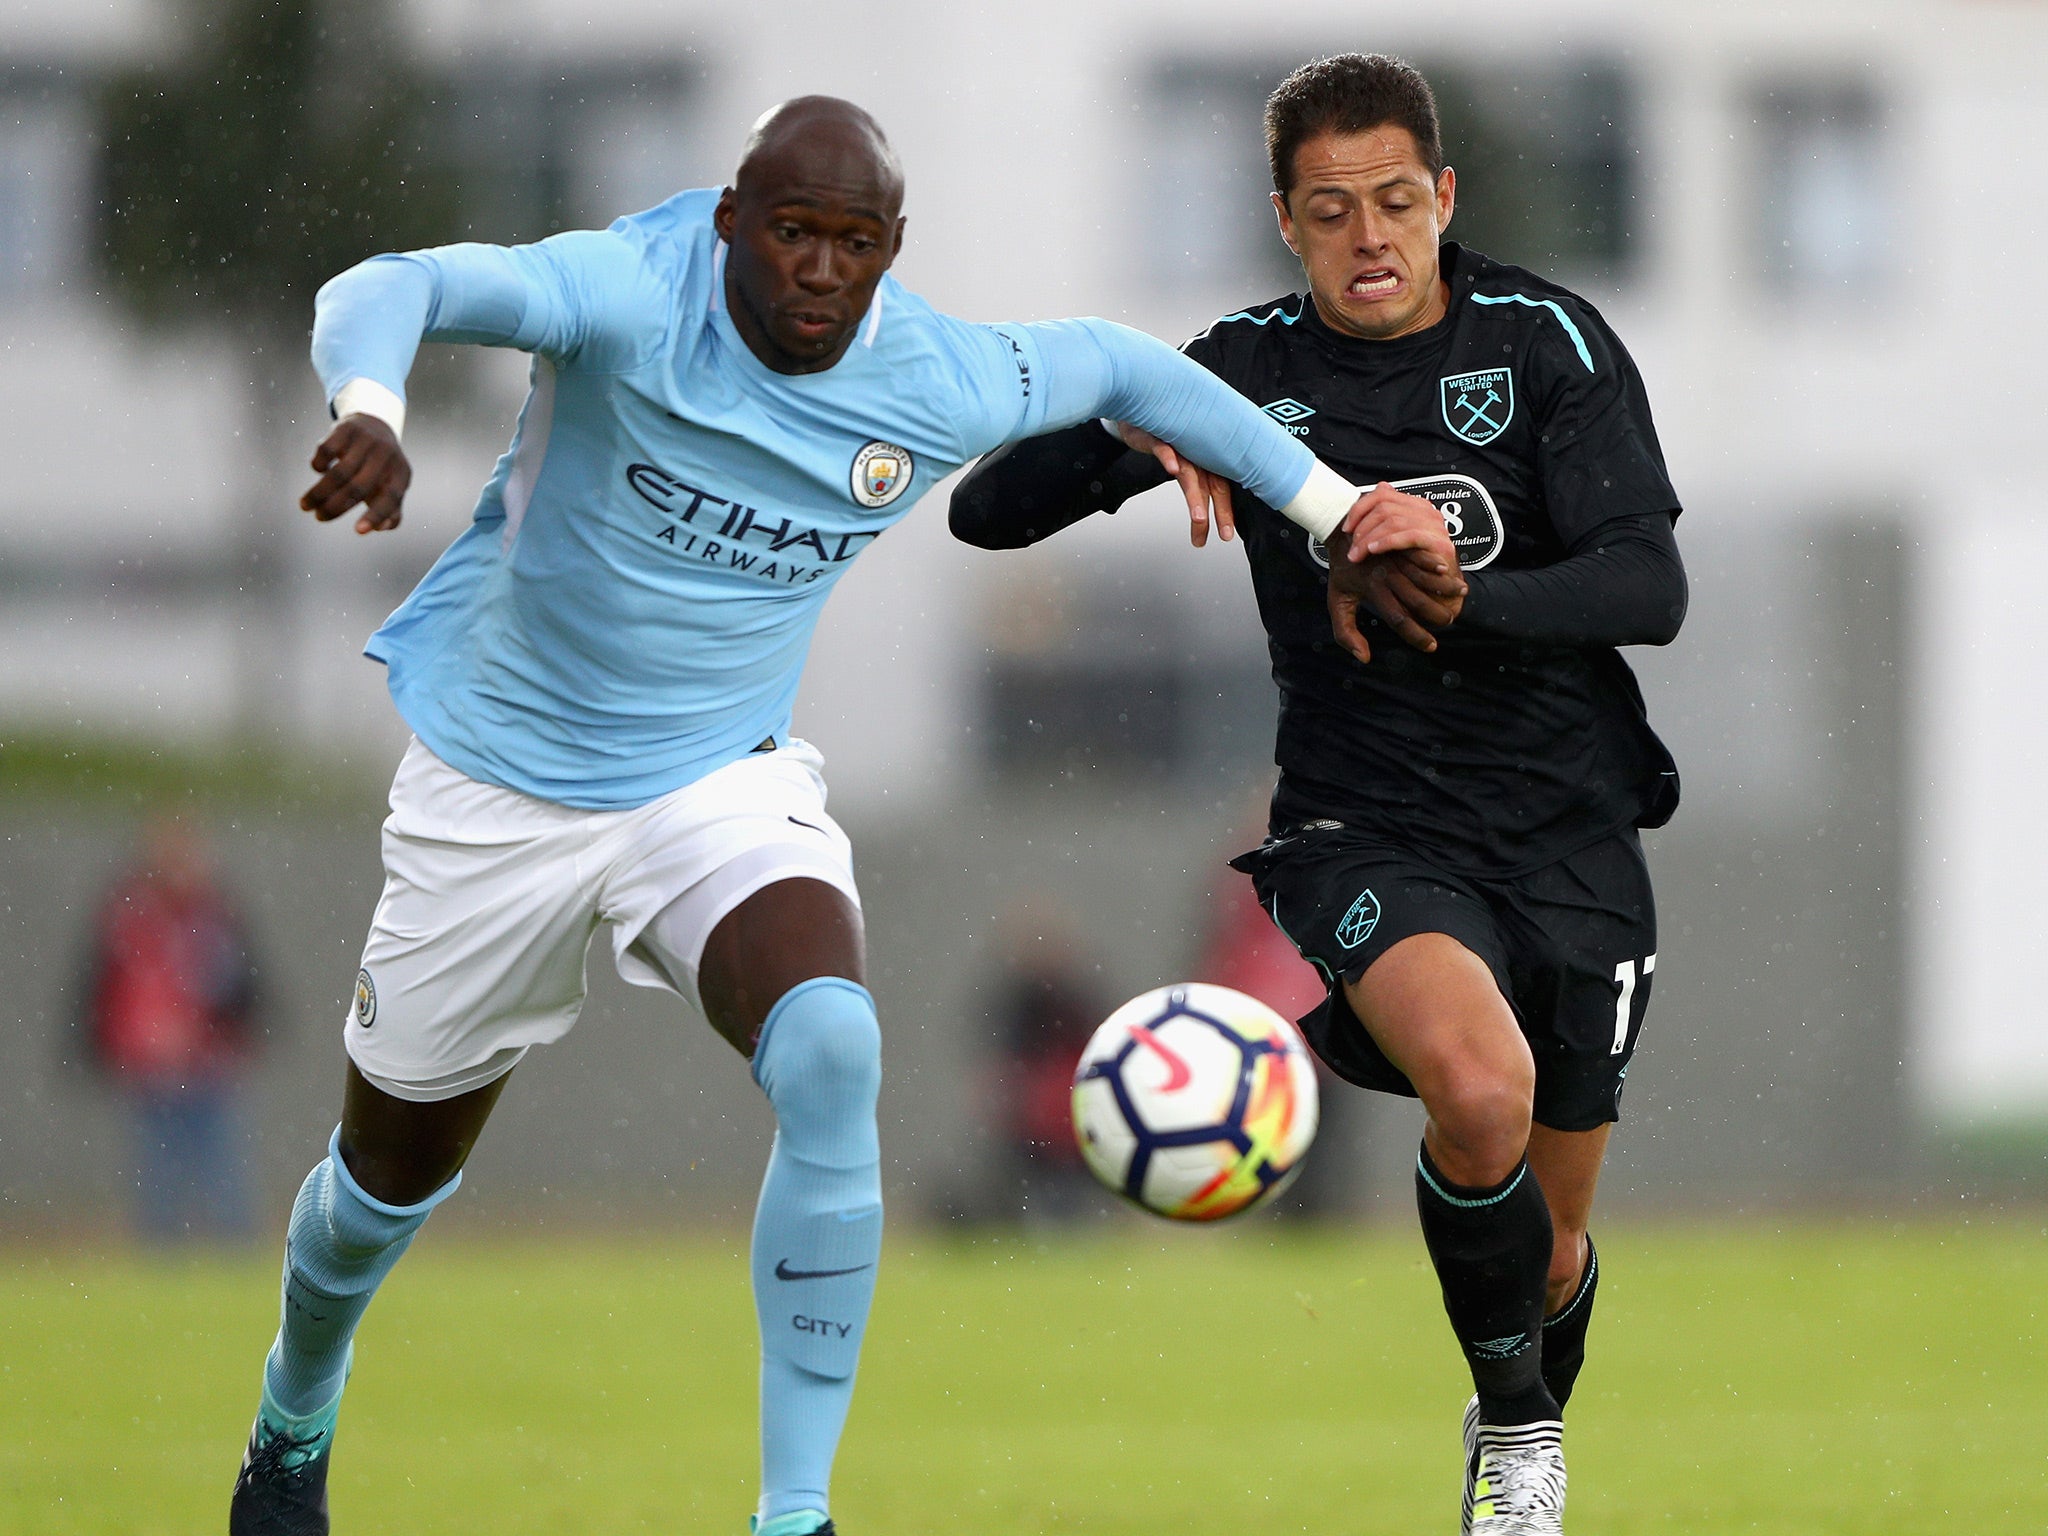 Eliaquim Mangala is up for sale at Manchester City after spending last season on loan at Valencia